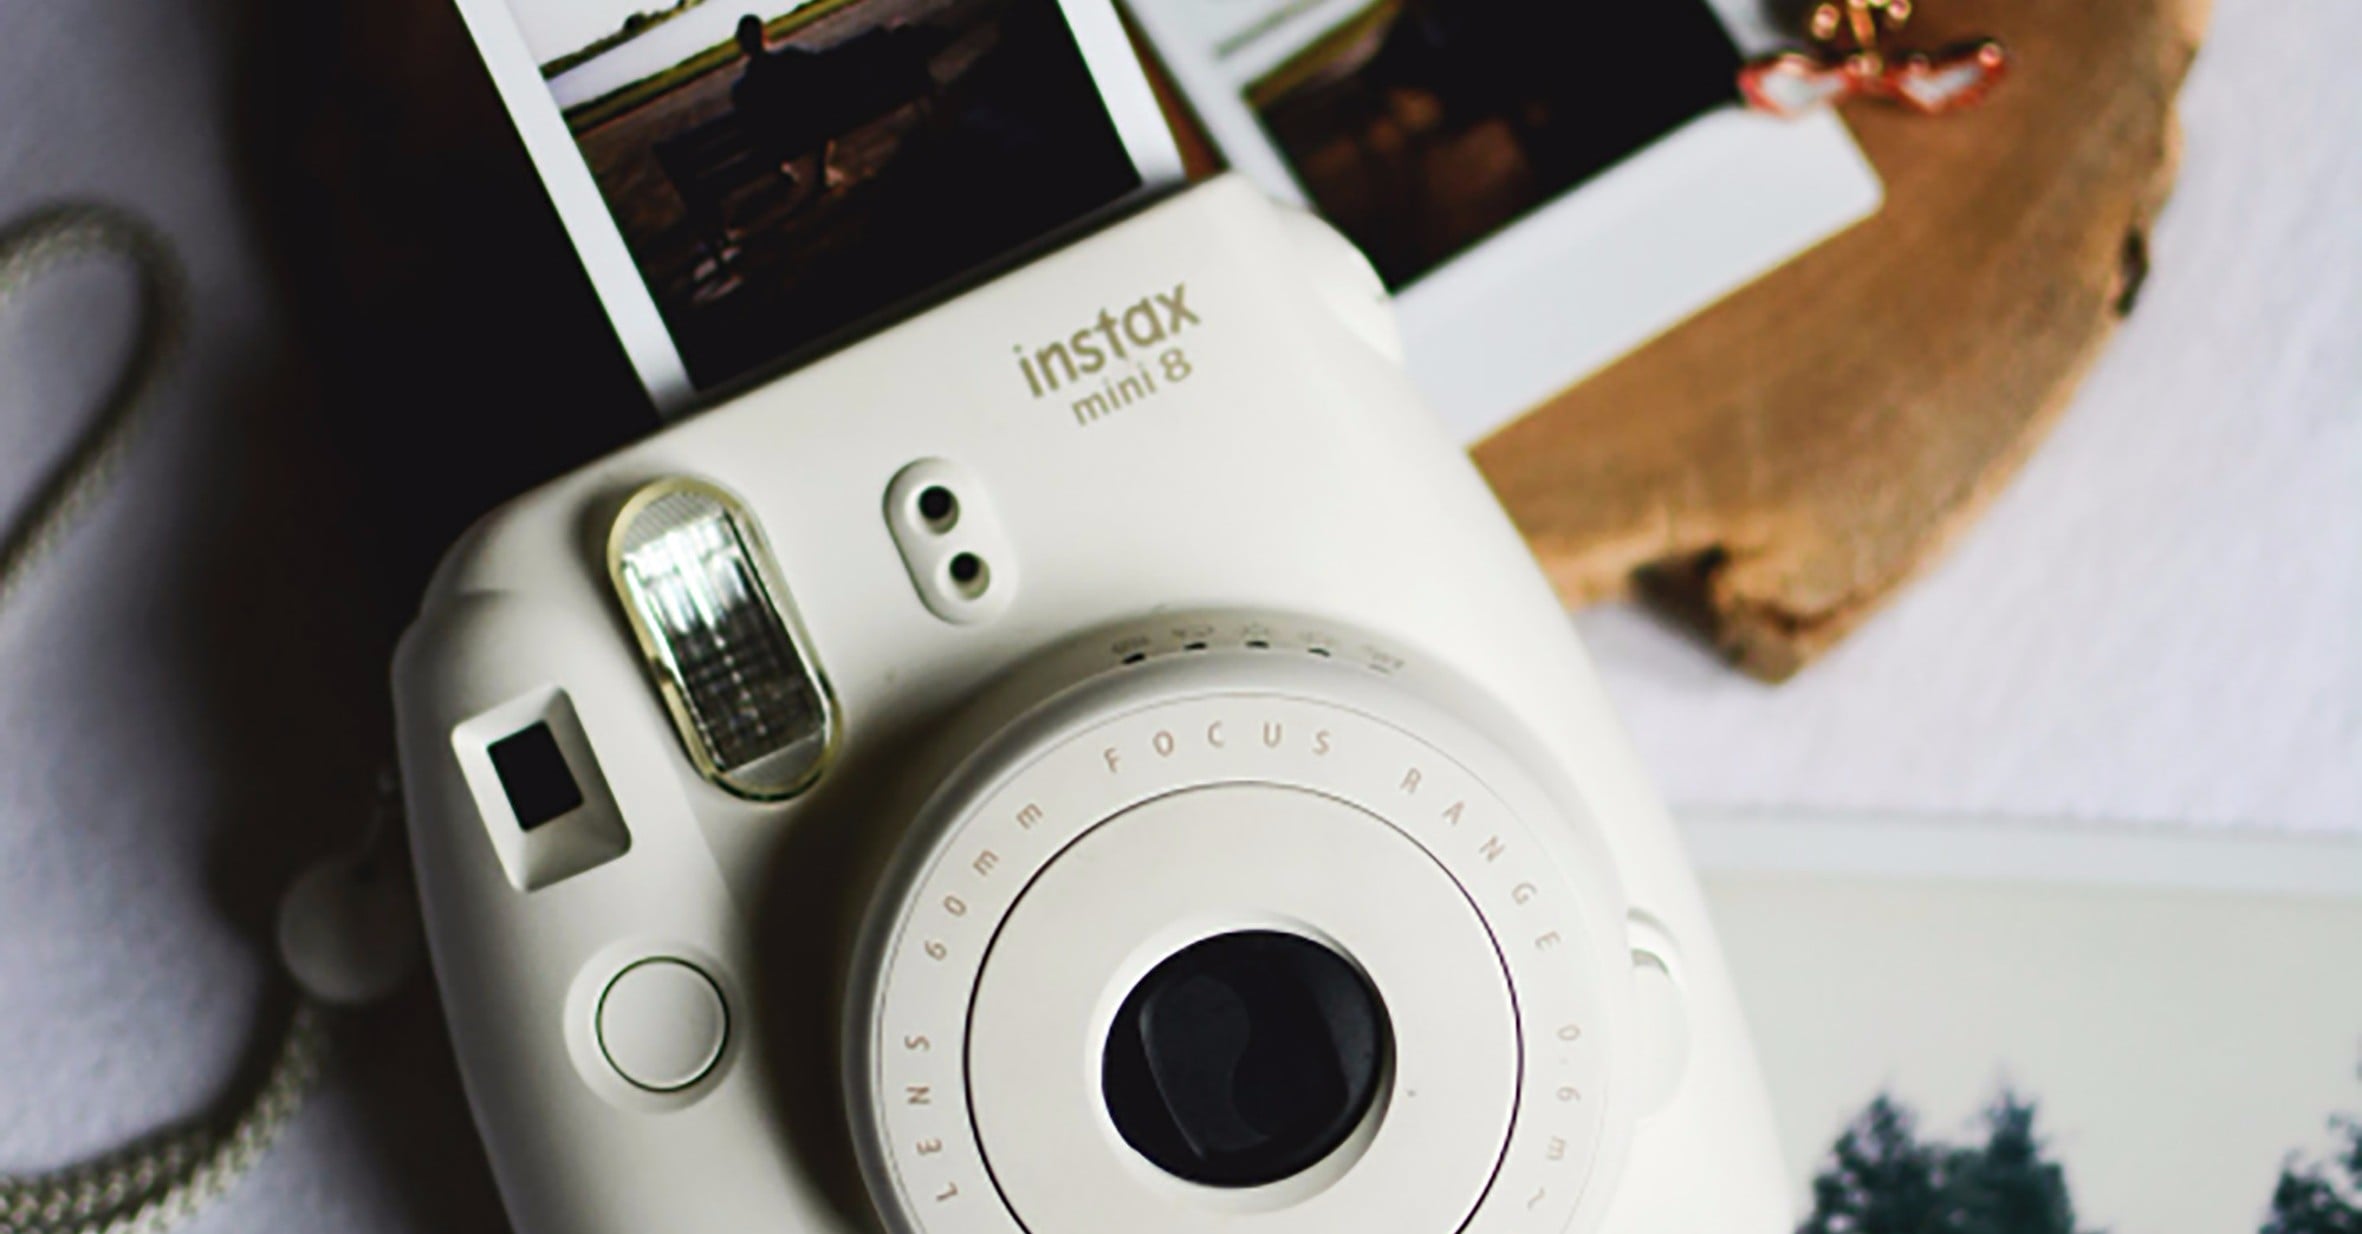 Creating an Instax family photo journal - The Travel Hack